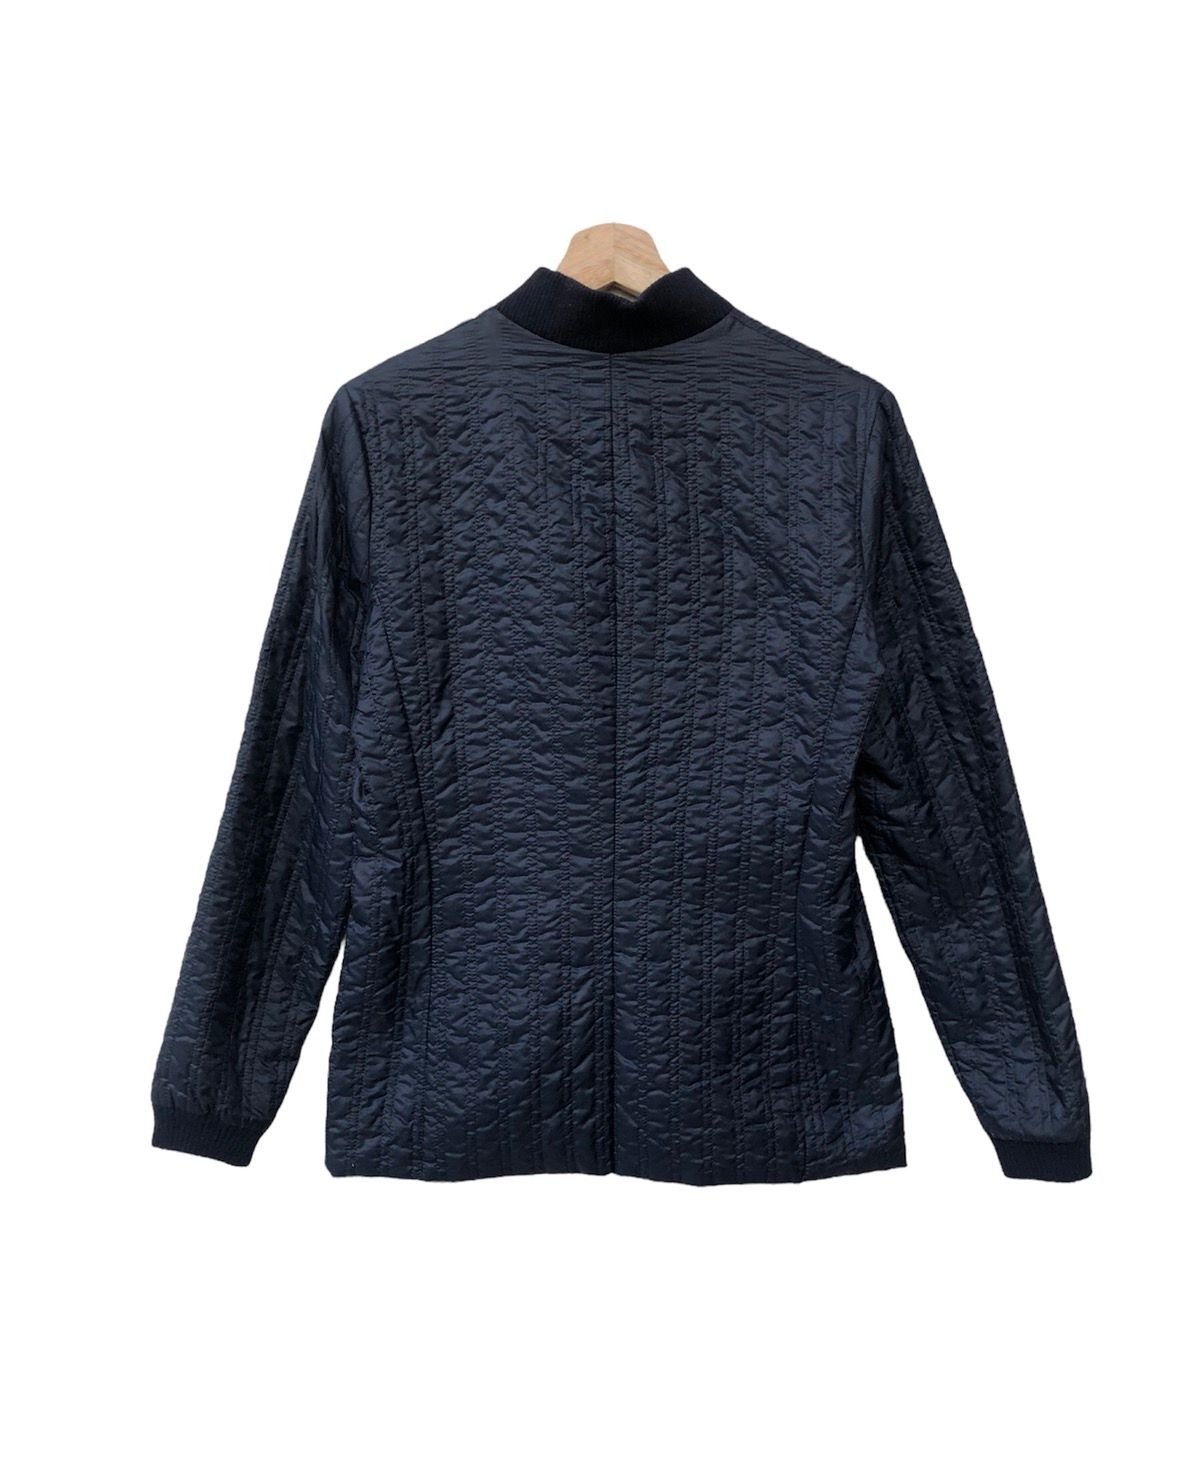 💥APC QUILTED JACKET - 2